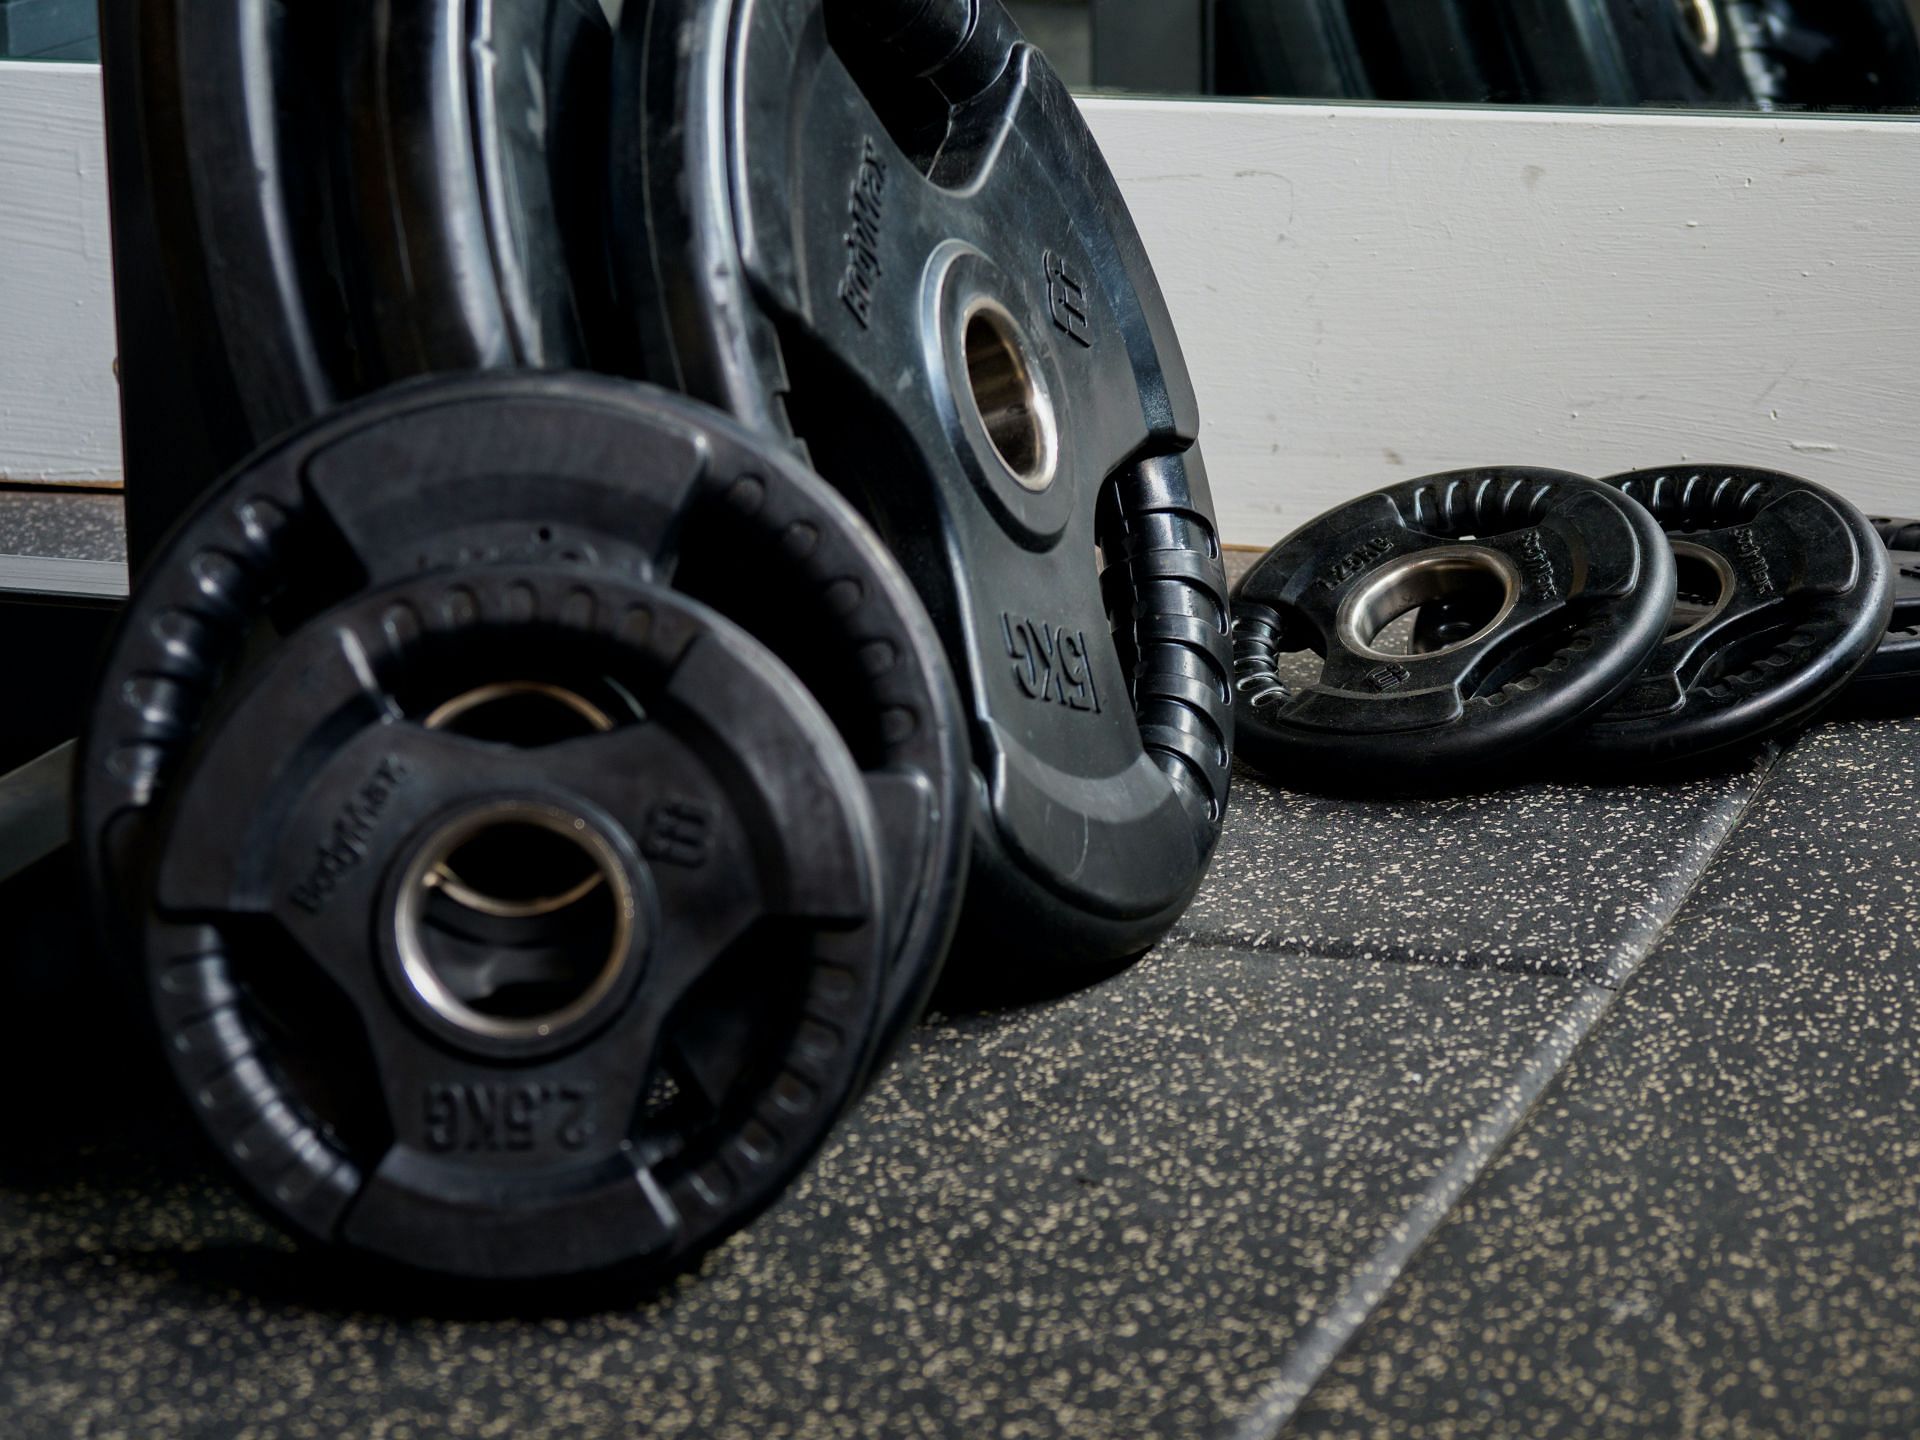 Weight plates are another great option for weightlifting at home. They are relatively inexpensive and can be used to add resistance to your exercises. (Photo by Brett Jordan/pexels)